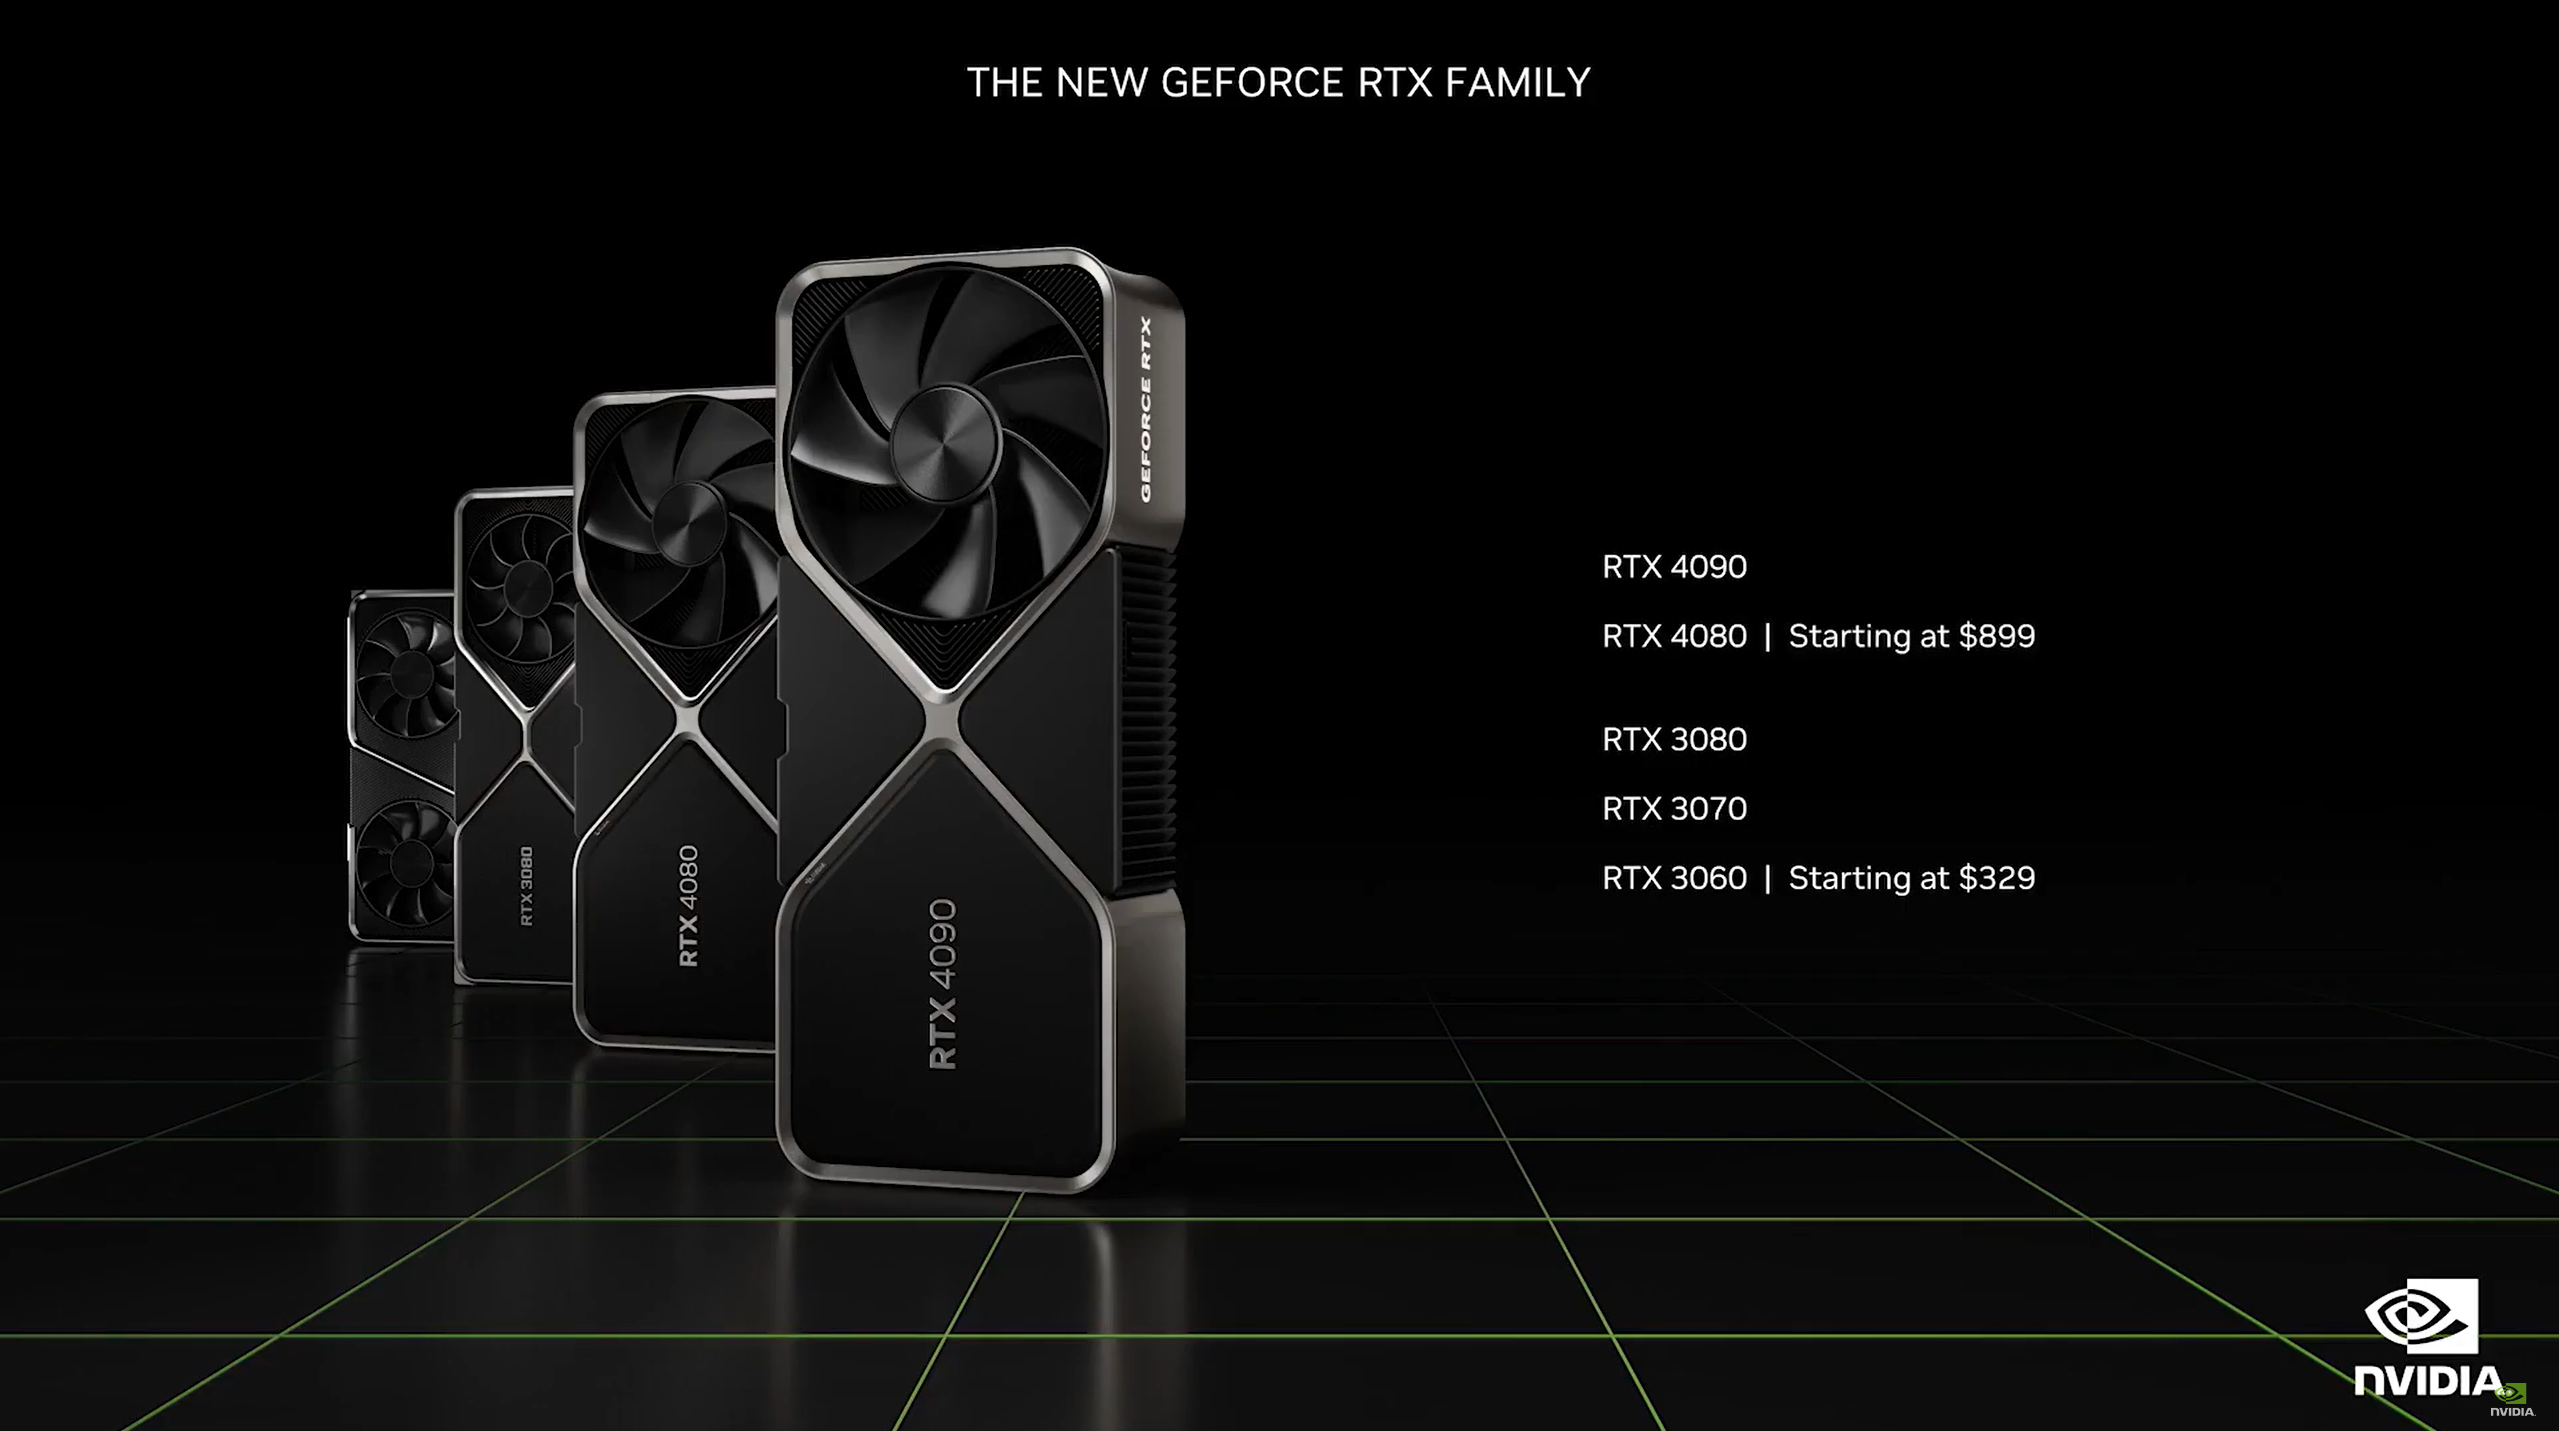 Nvidia announces the next generation of gaming hardware for PC gamers